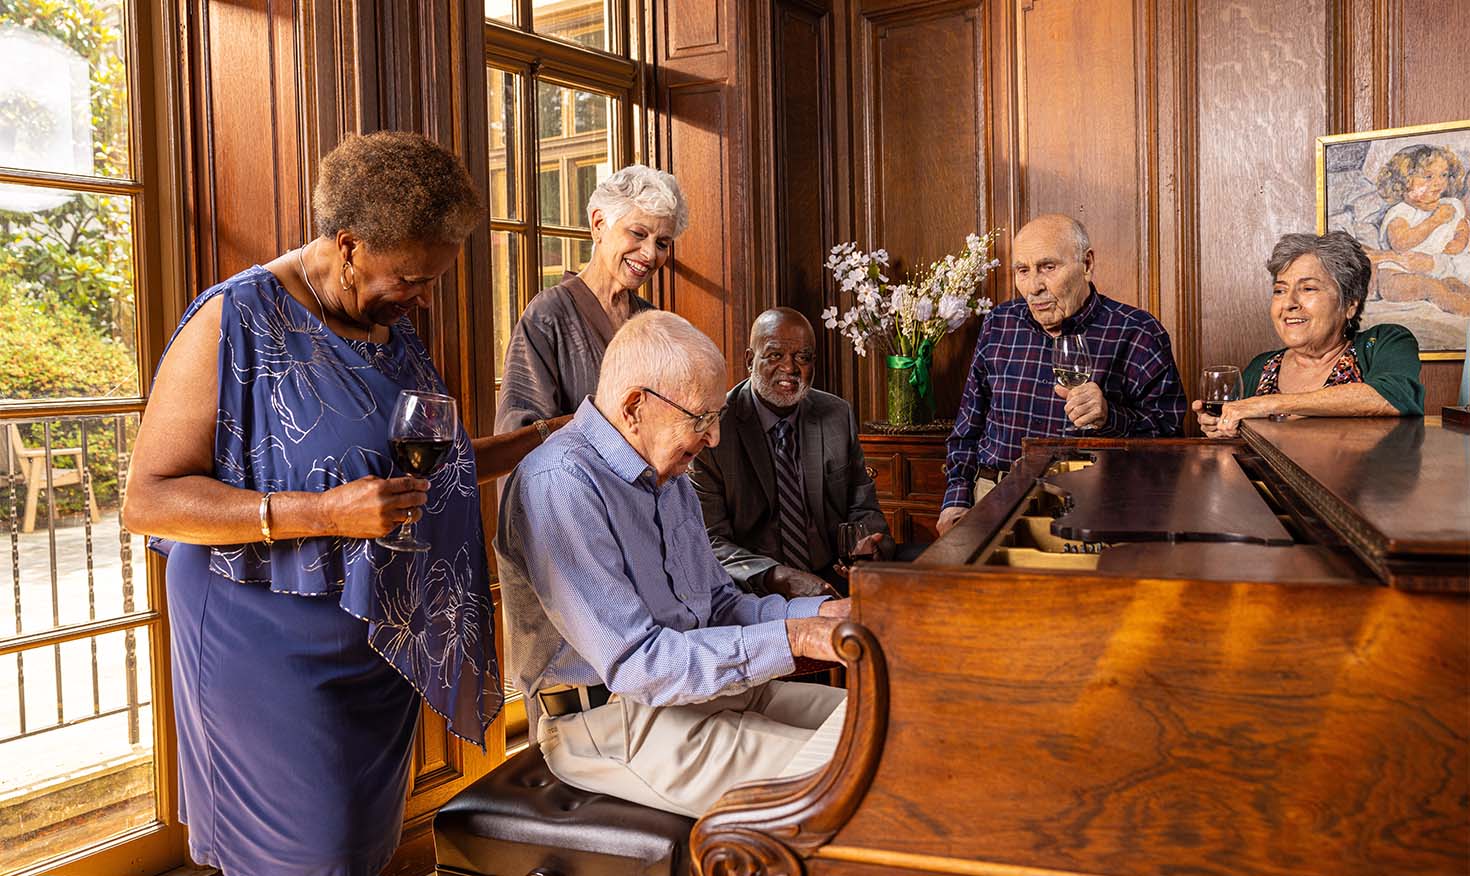 Senior friends gathered around a man playing music on a piano